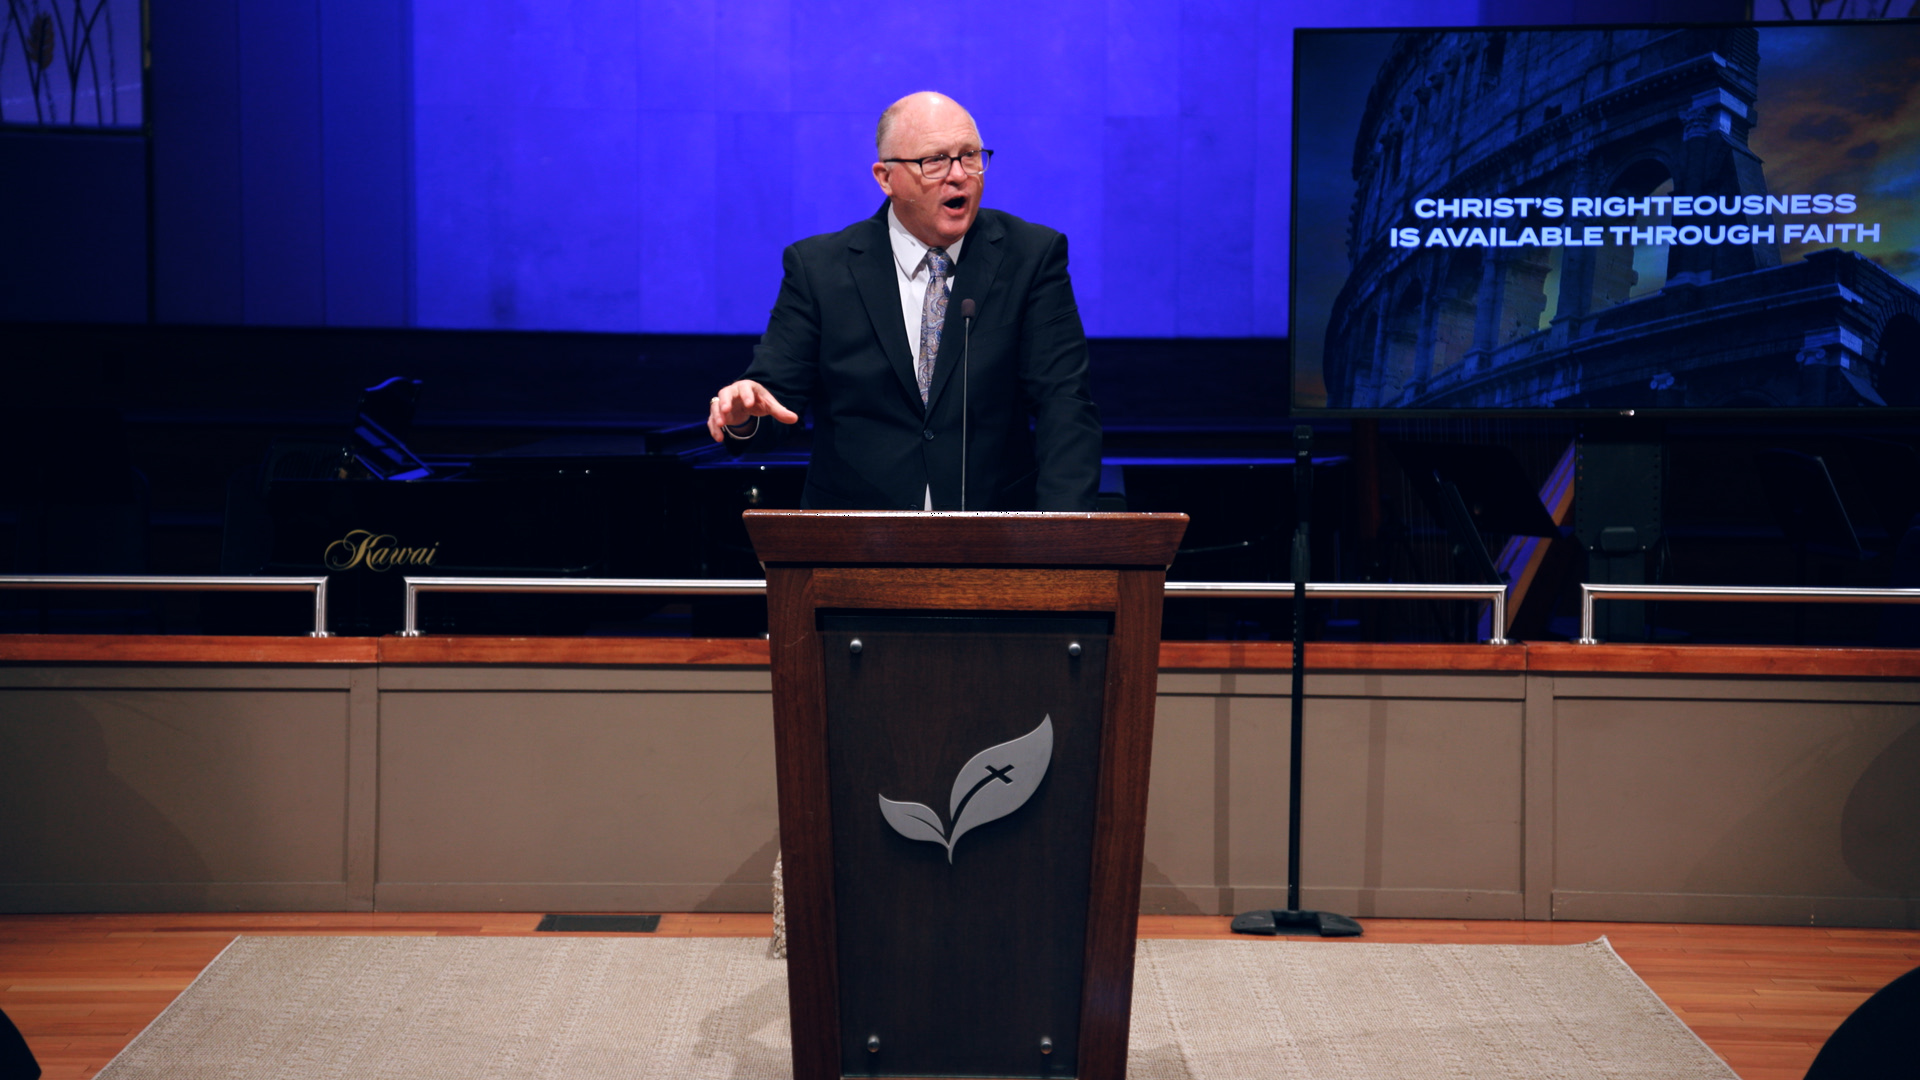 Pastor Paul Chappell: Righteousness For All